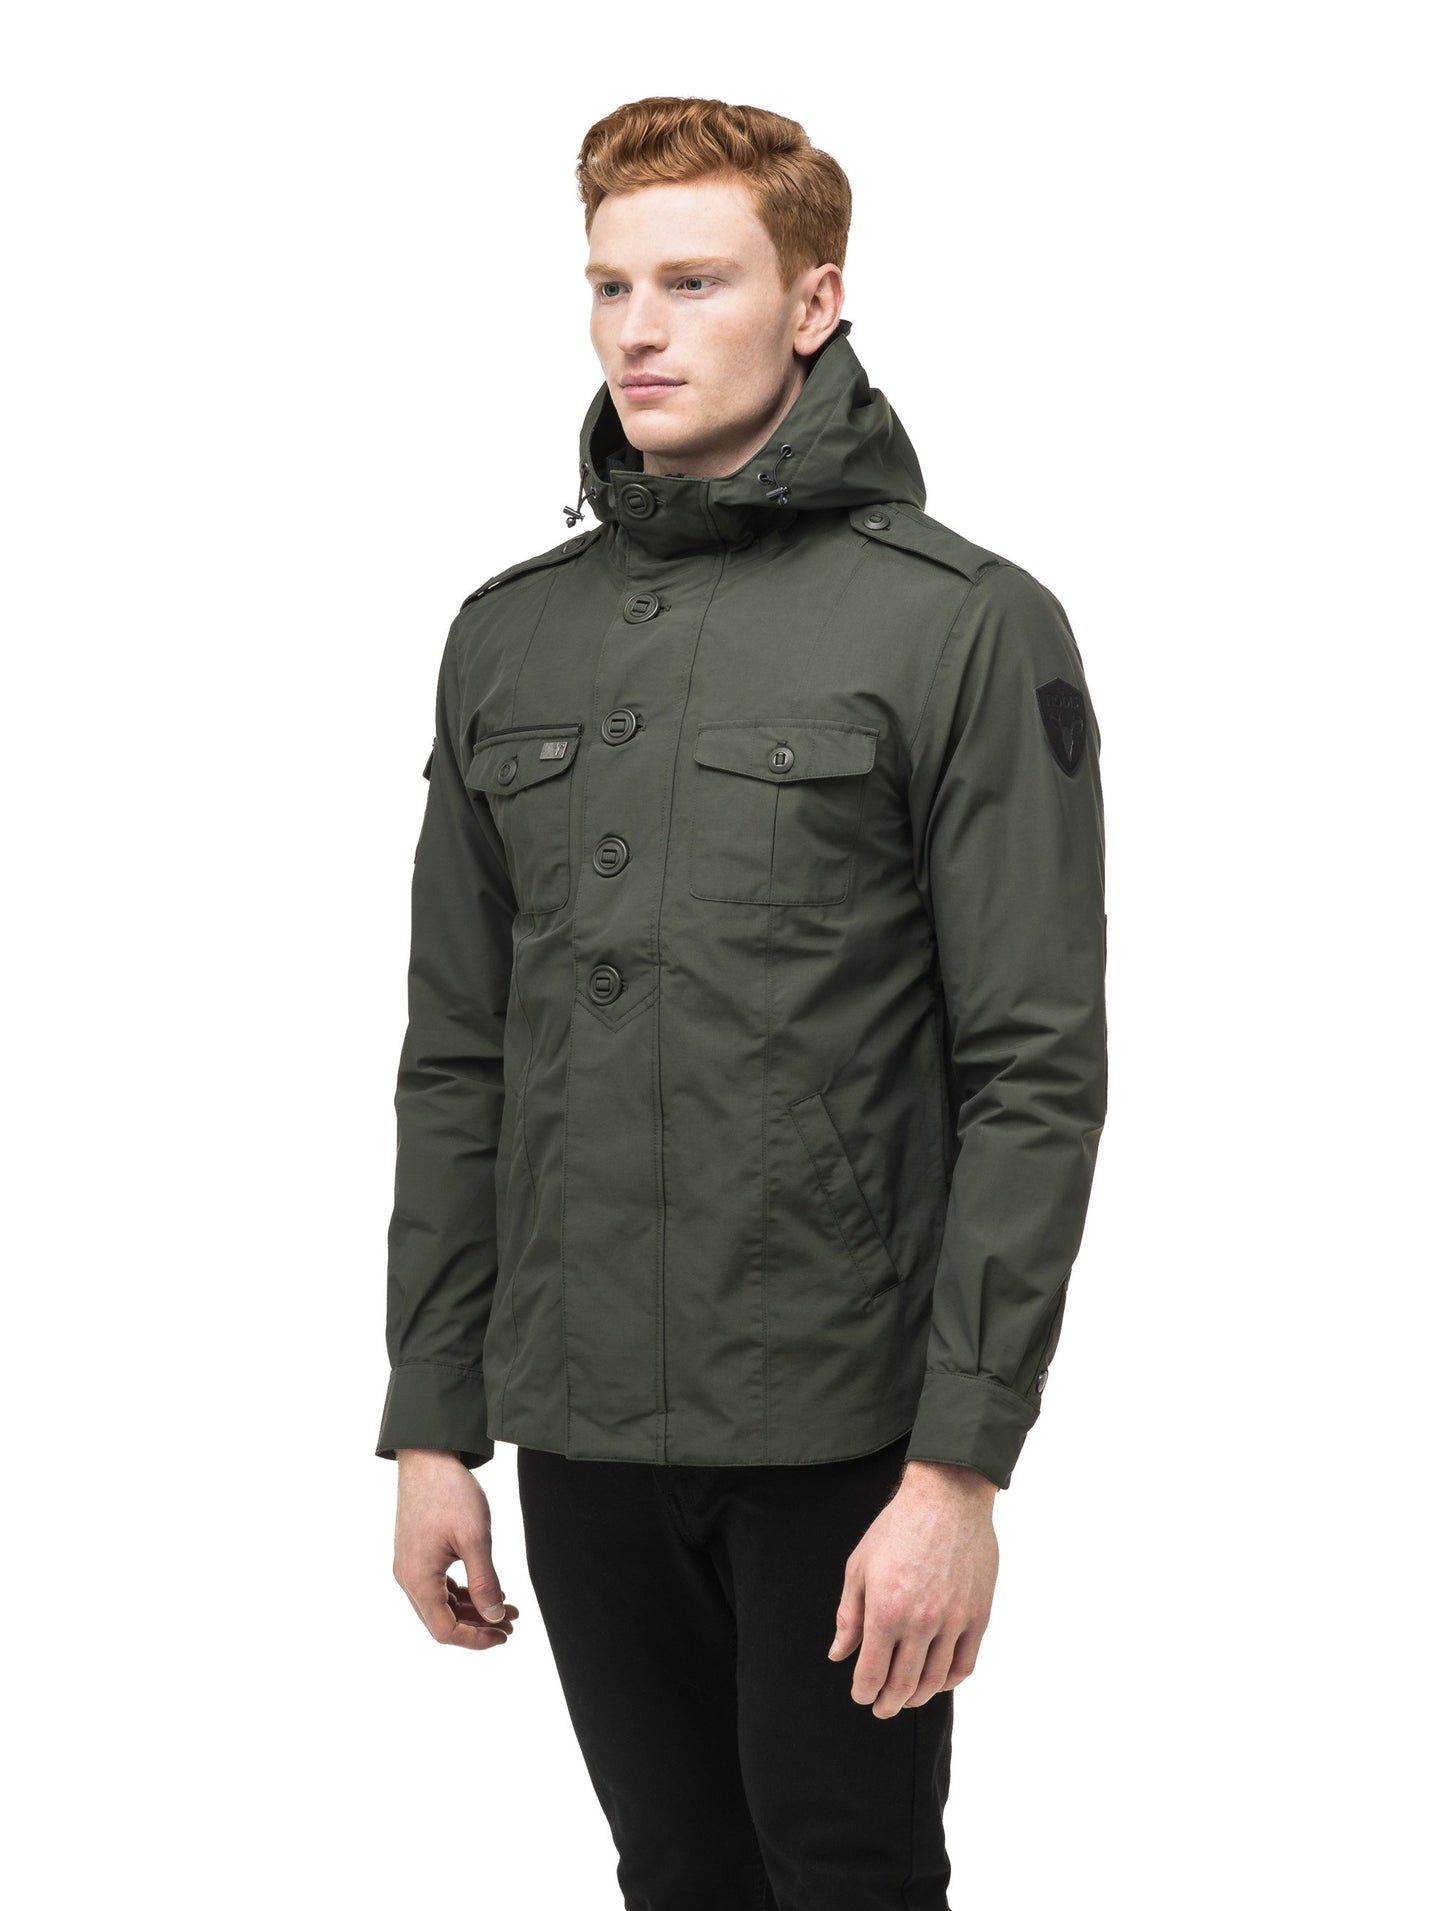 Men's hooded shirt jacket with patch chest pockets in Dark Forest